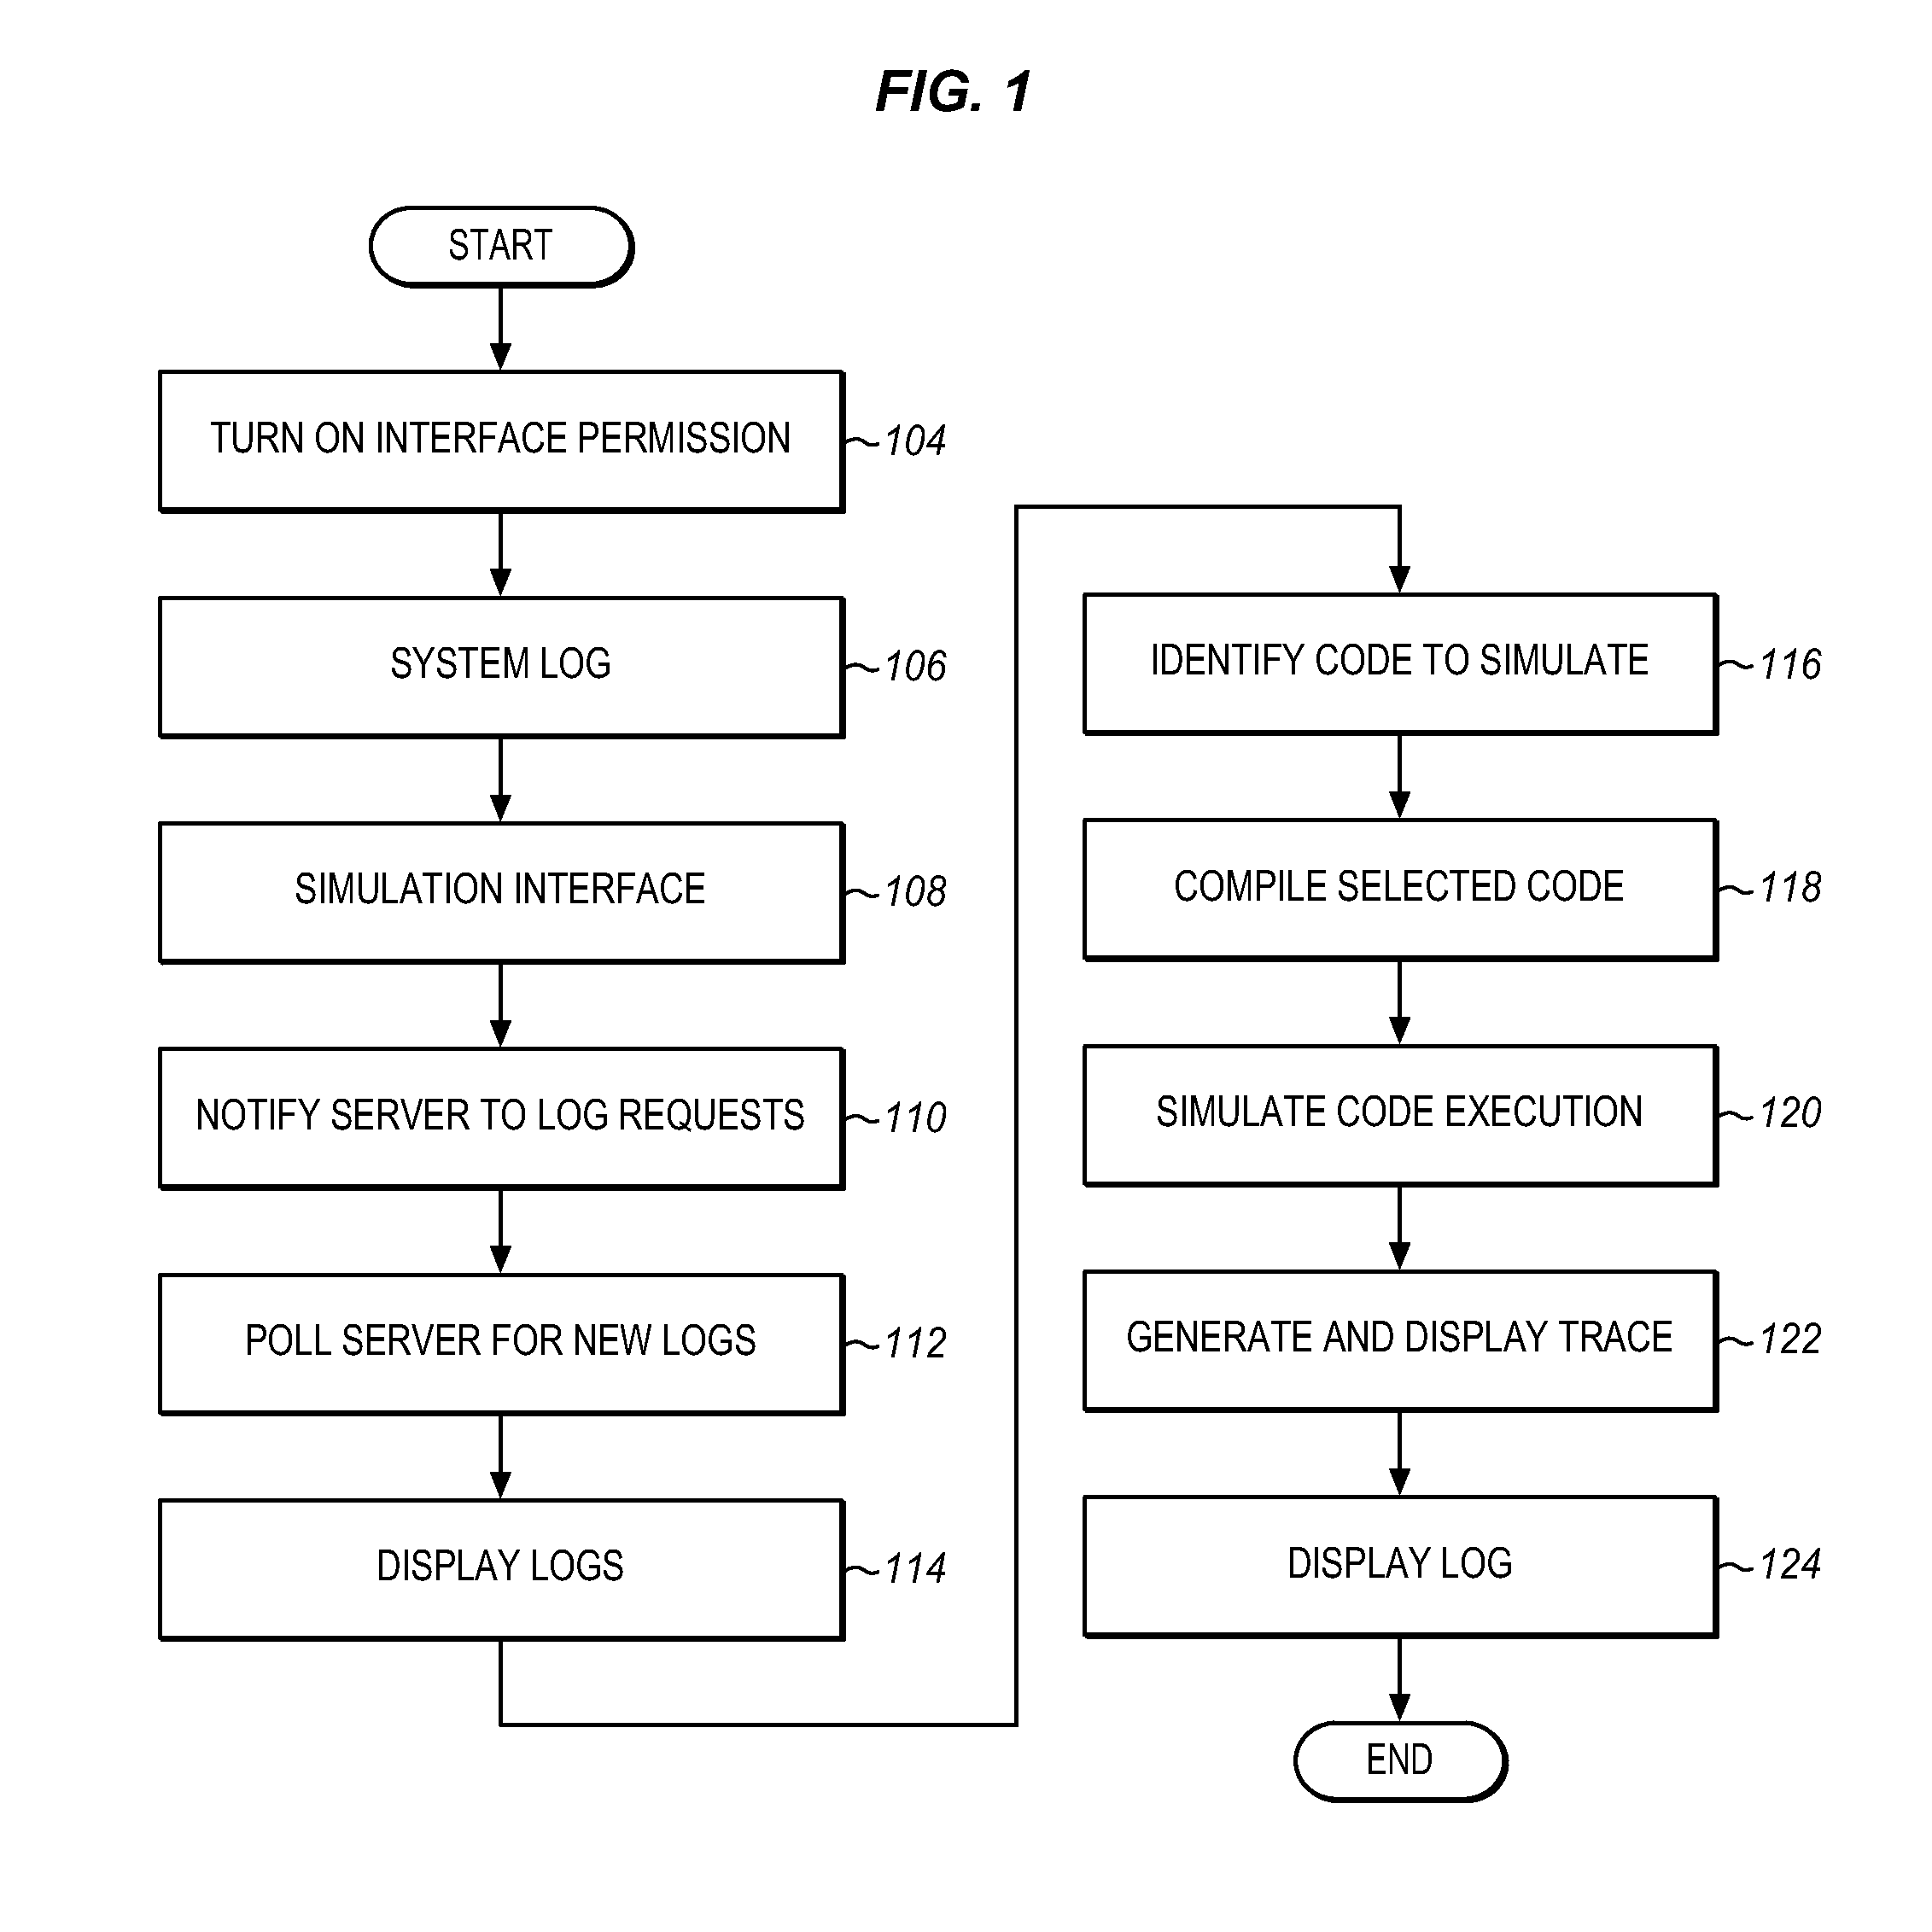 Method and system for simulating and analyzing code execution in an on-demand service environment